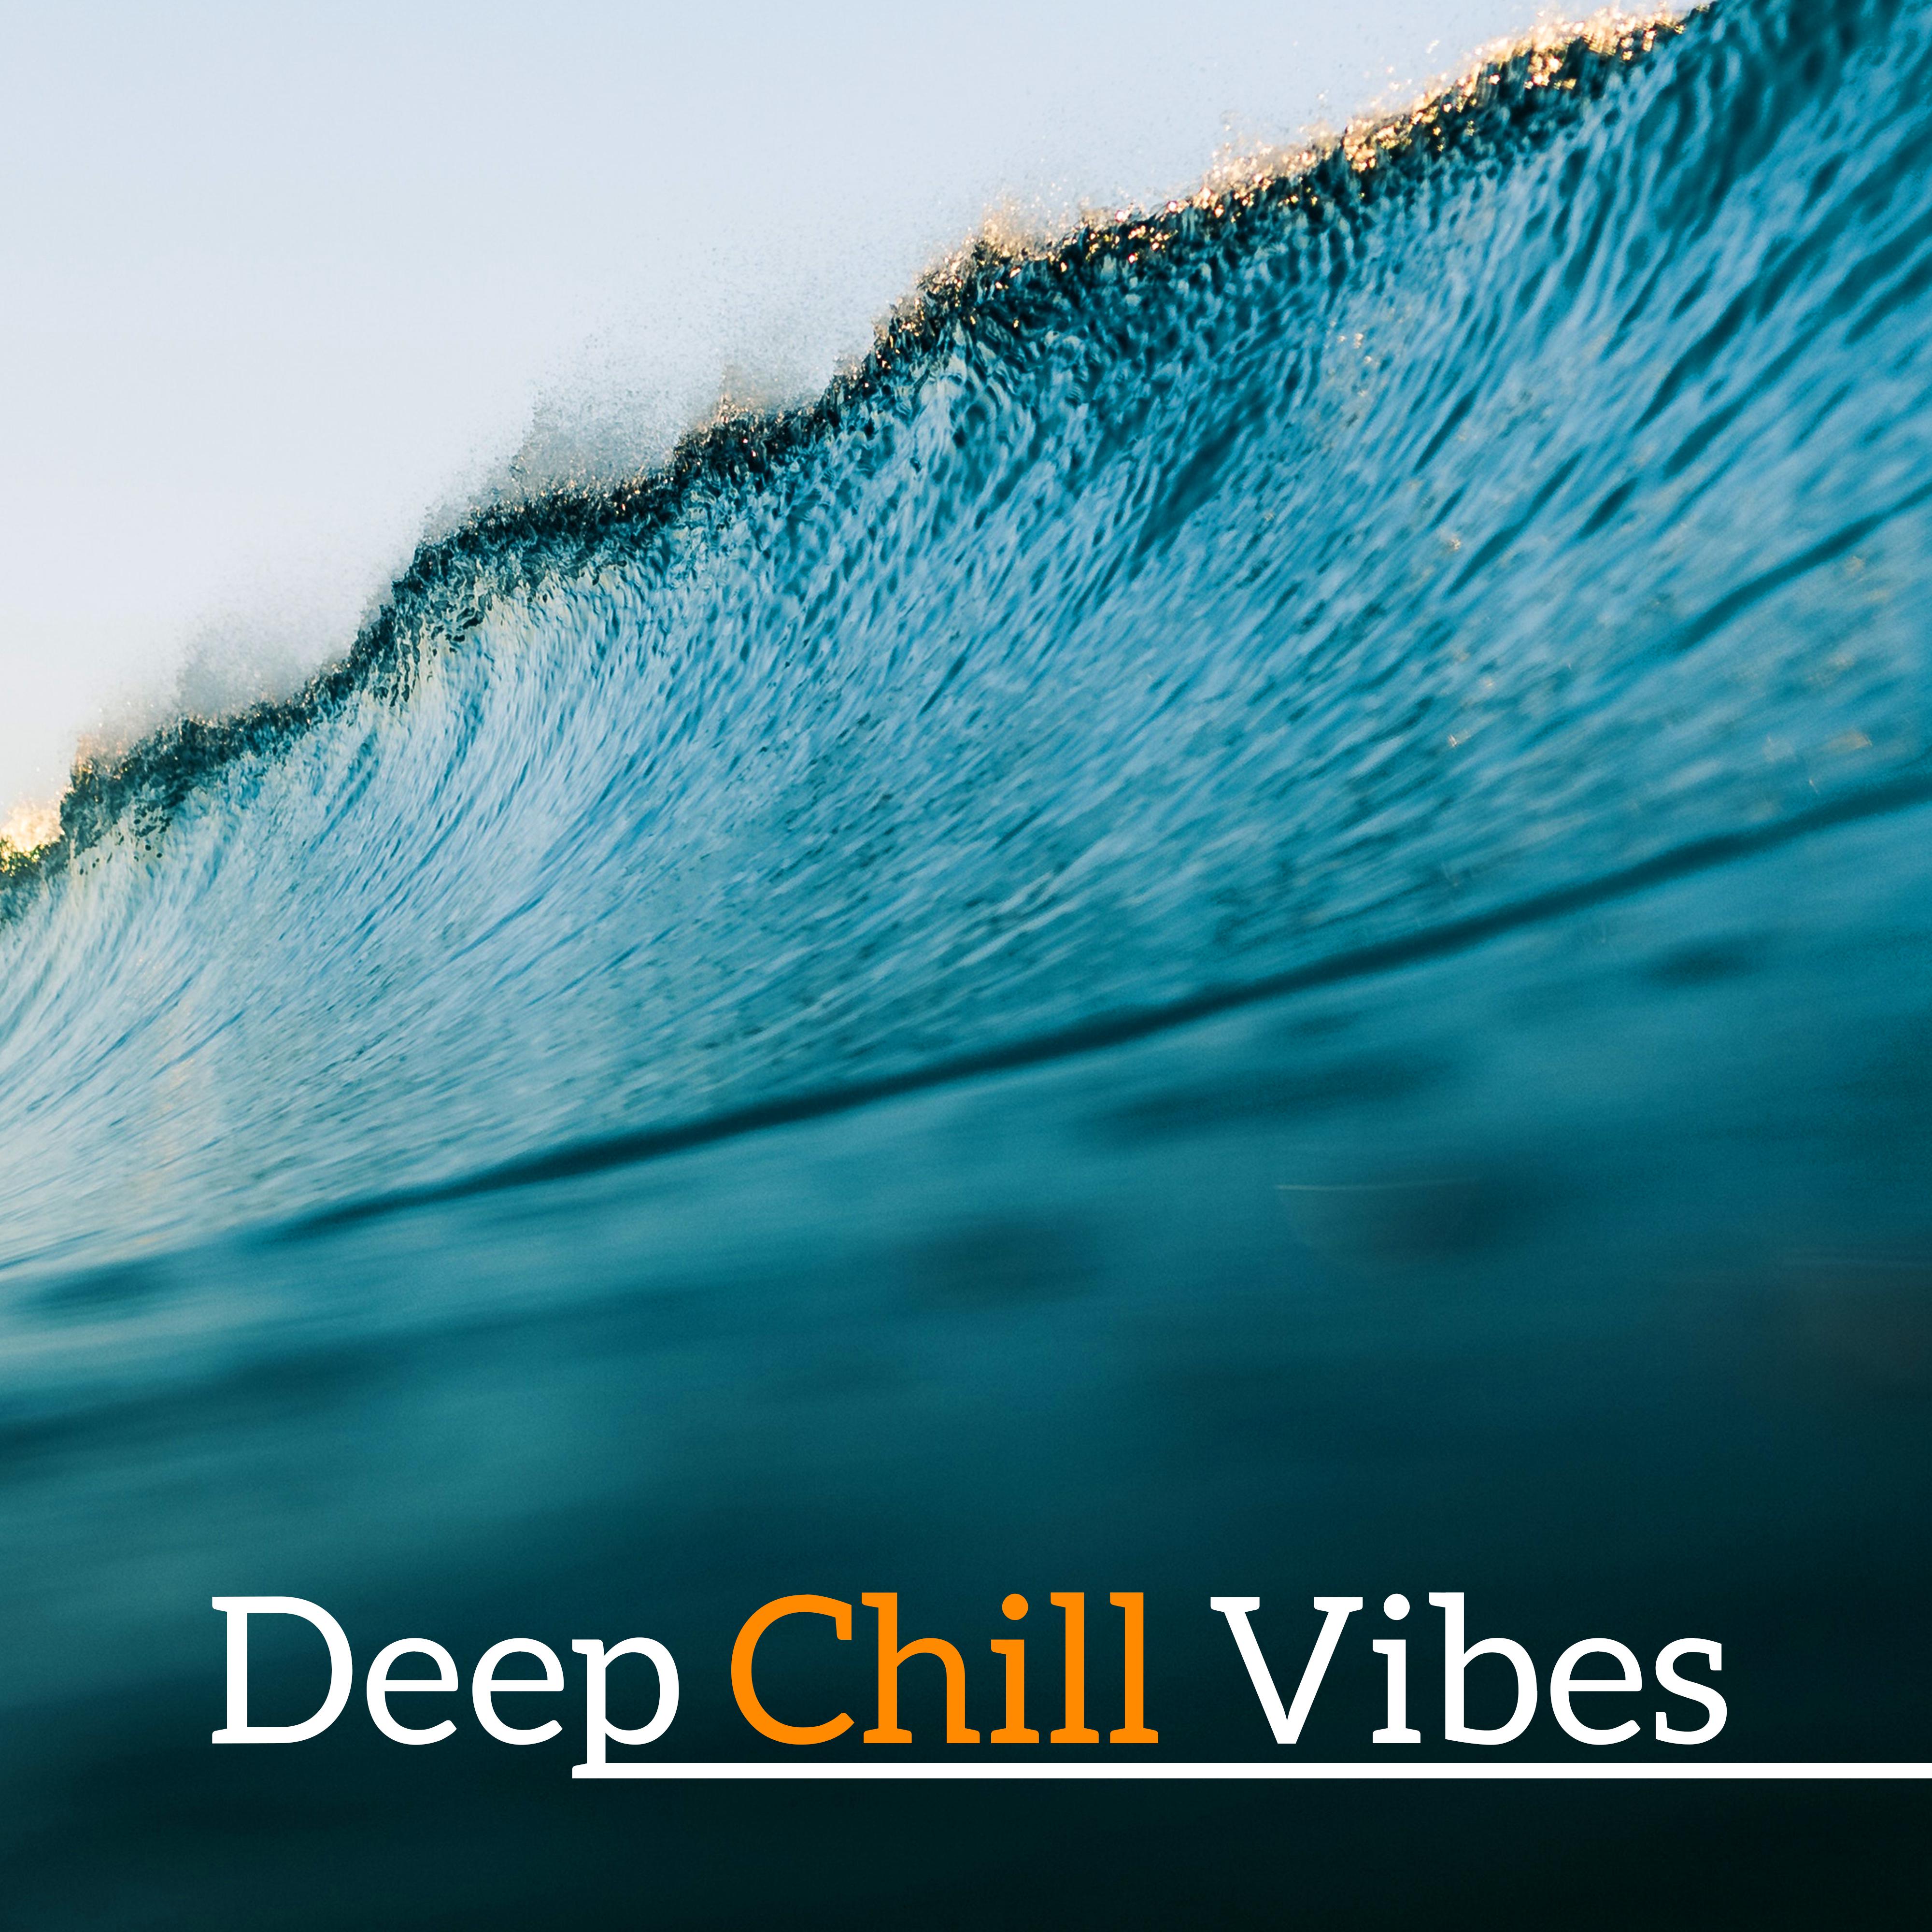 Deep Chill Vibes – Summer Relaxing Memories, Rest on the Beach, Peaceful Sounds, Calming Melodies